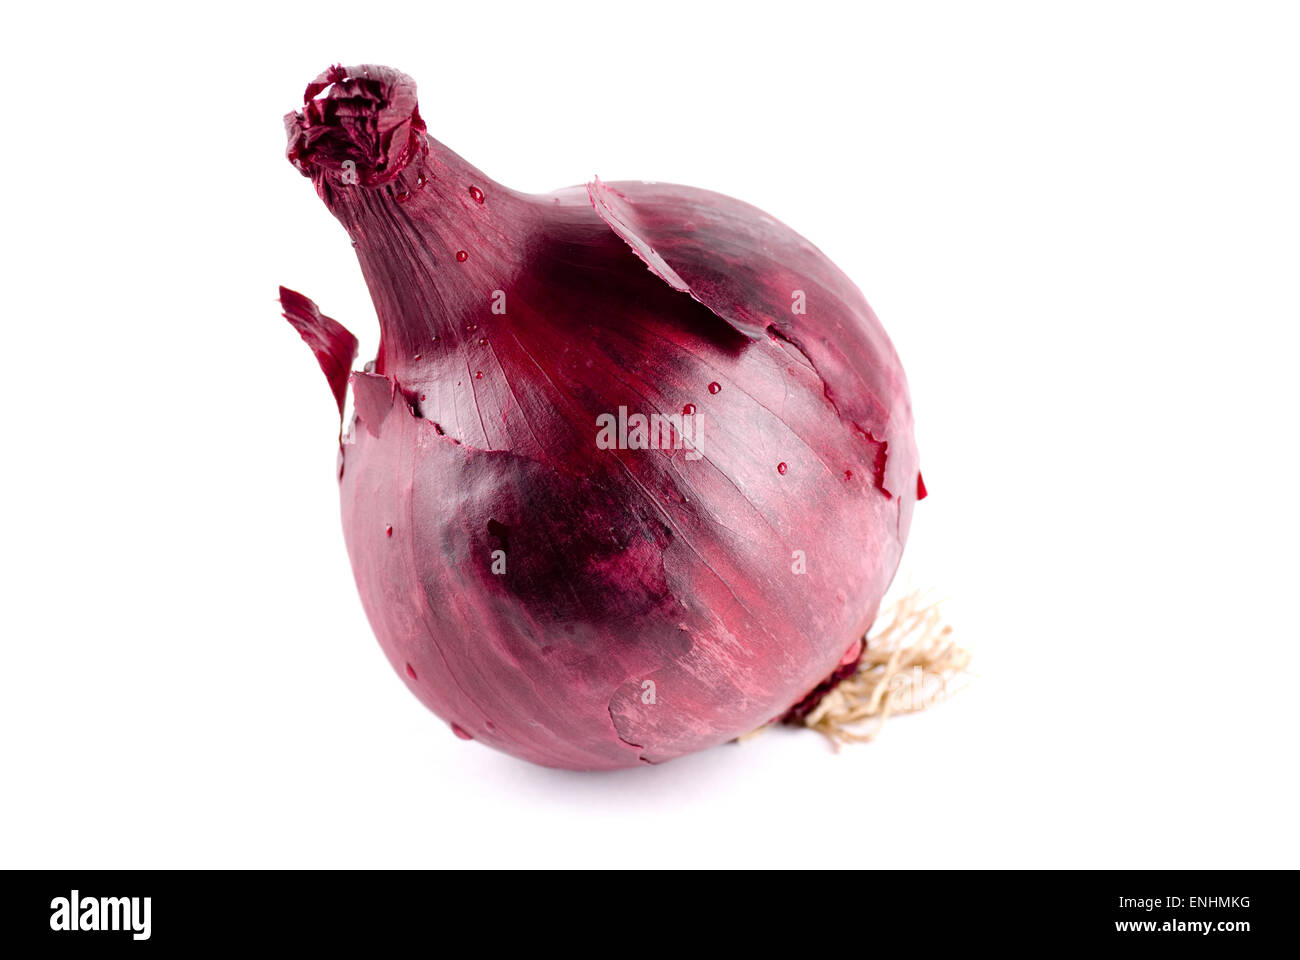 Single unpeeled red onion close up. Stock Photo